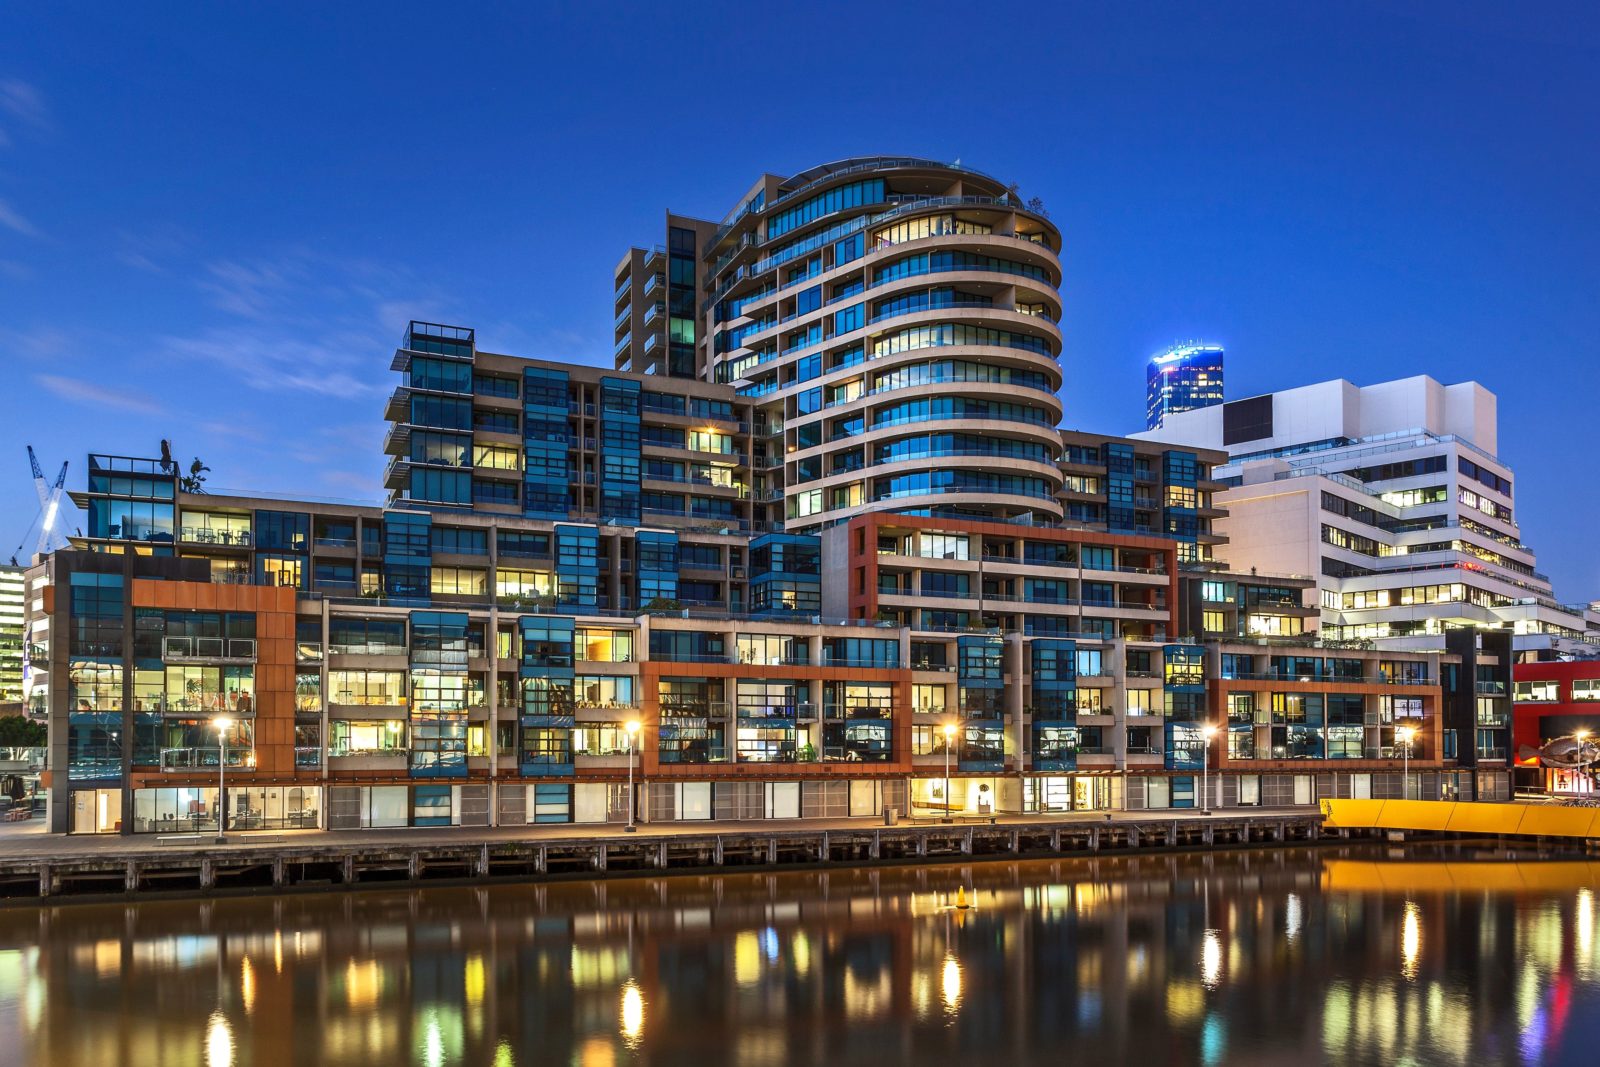 Facade of hotel and Yarra River